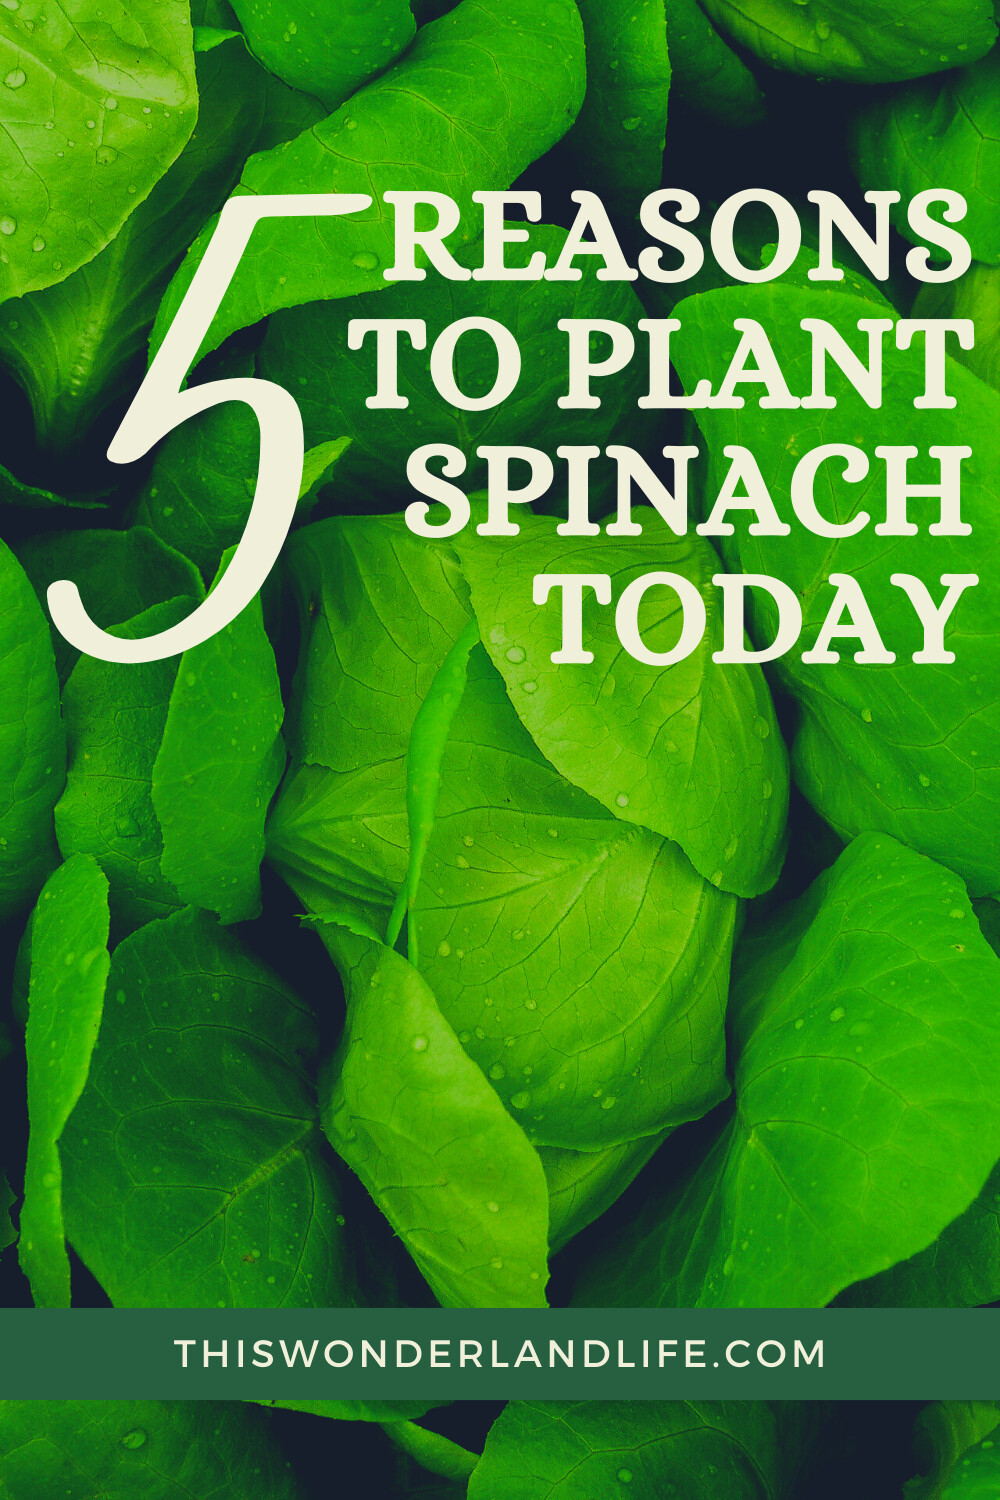 5 Reasons Every Gardener Should Grow Spinach